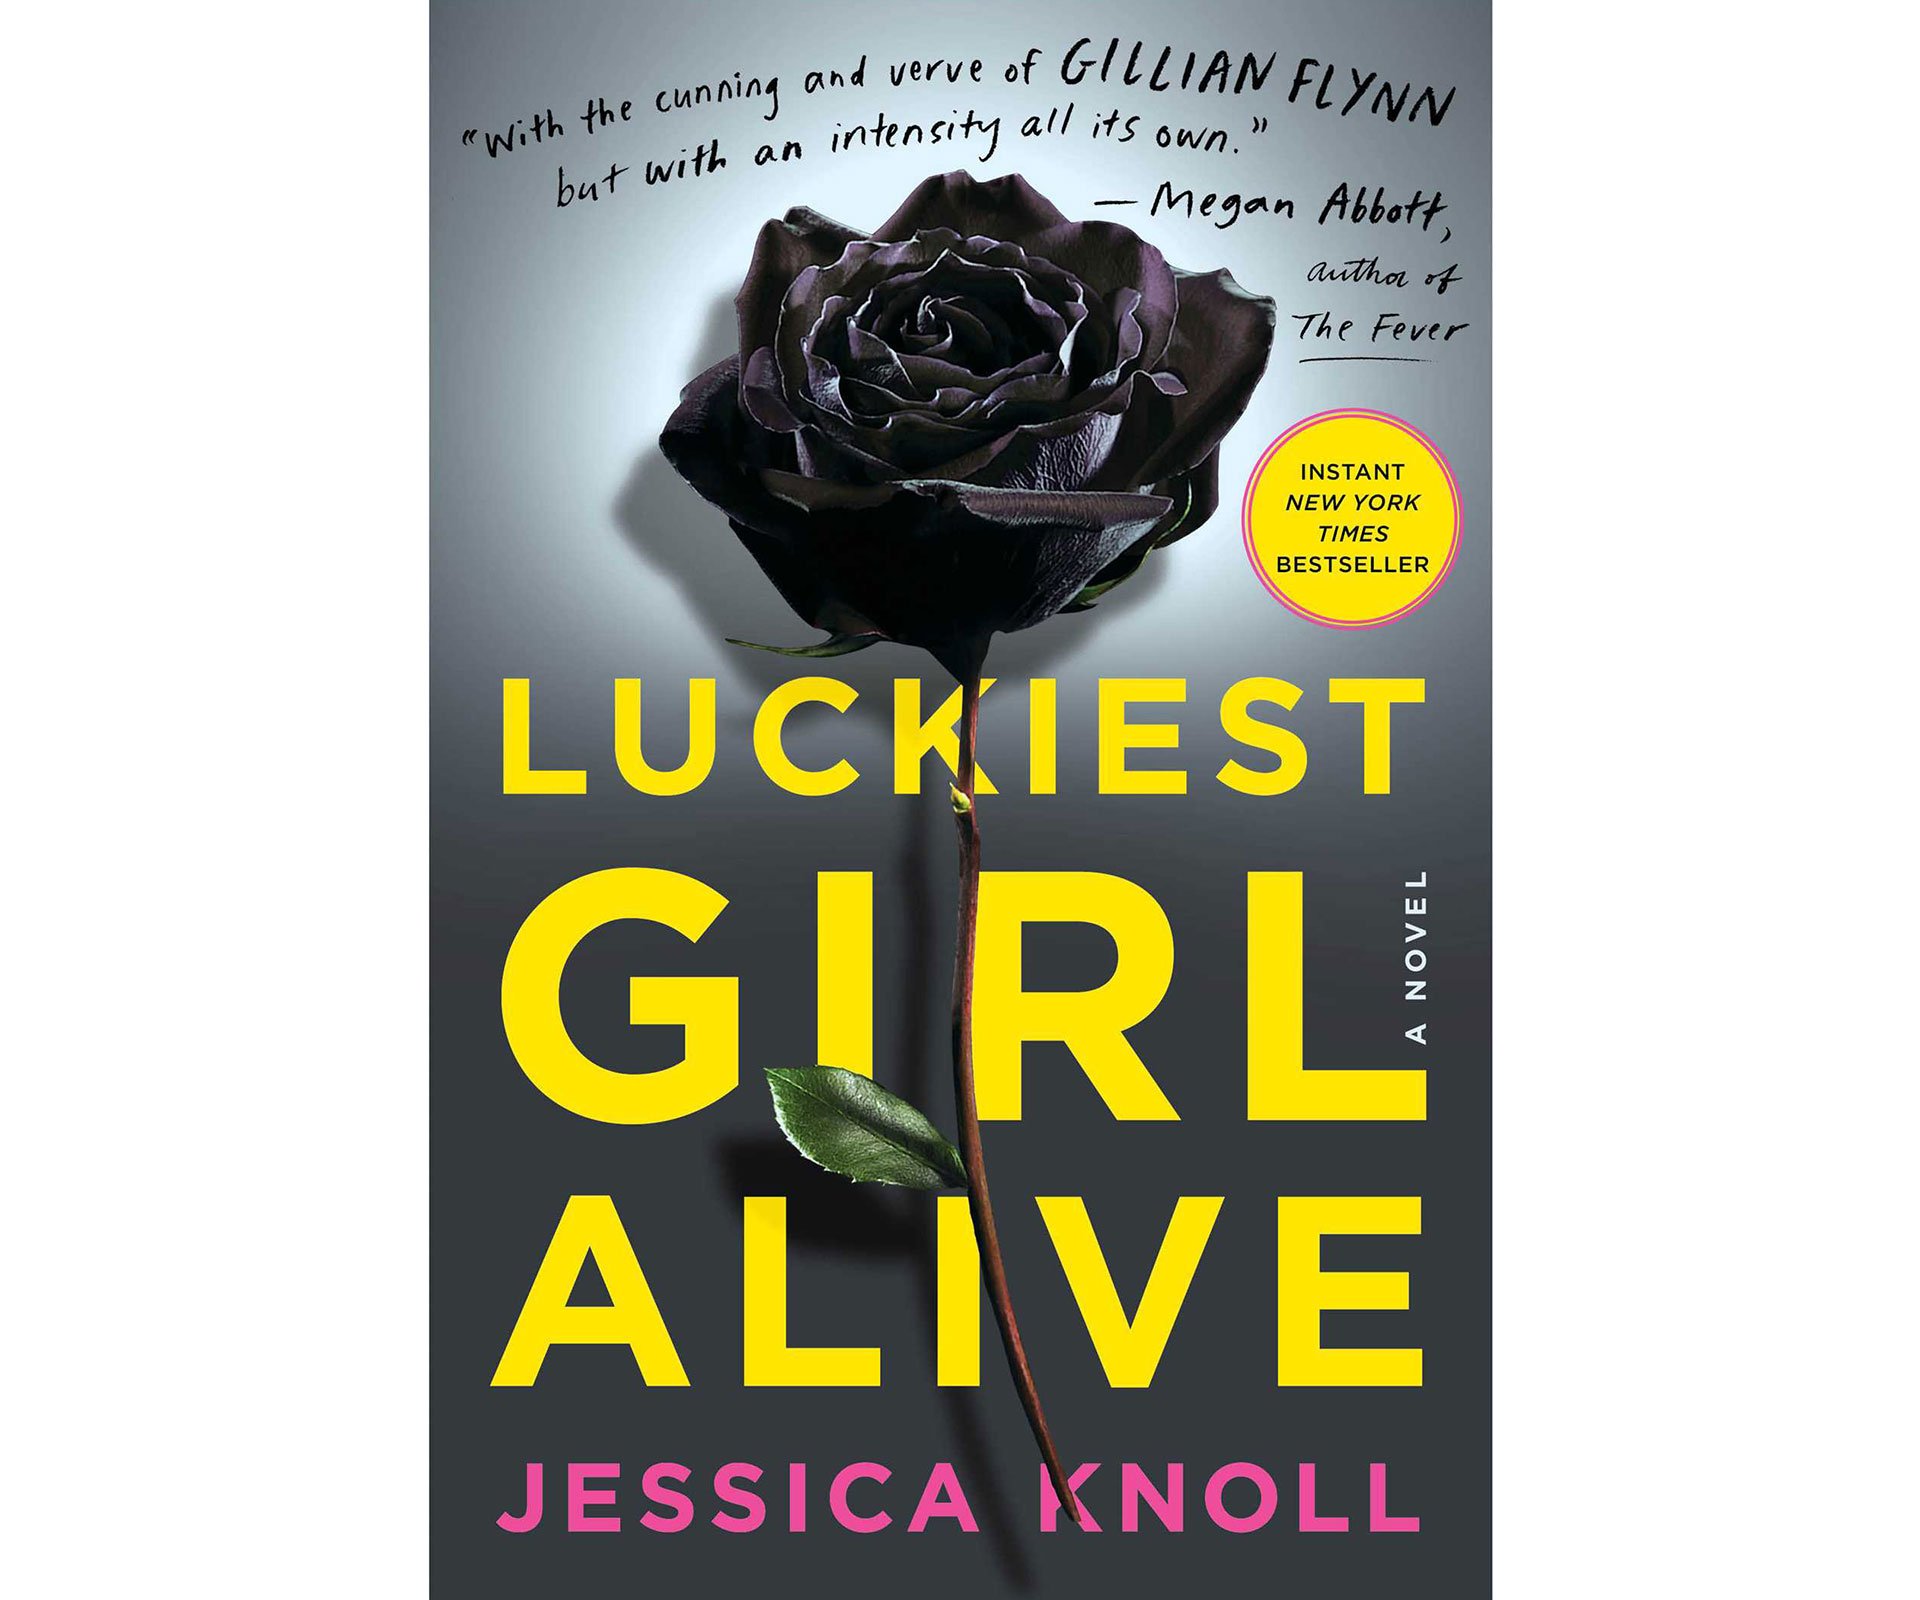 Luckiest girl alive by Jessica Knoll